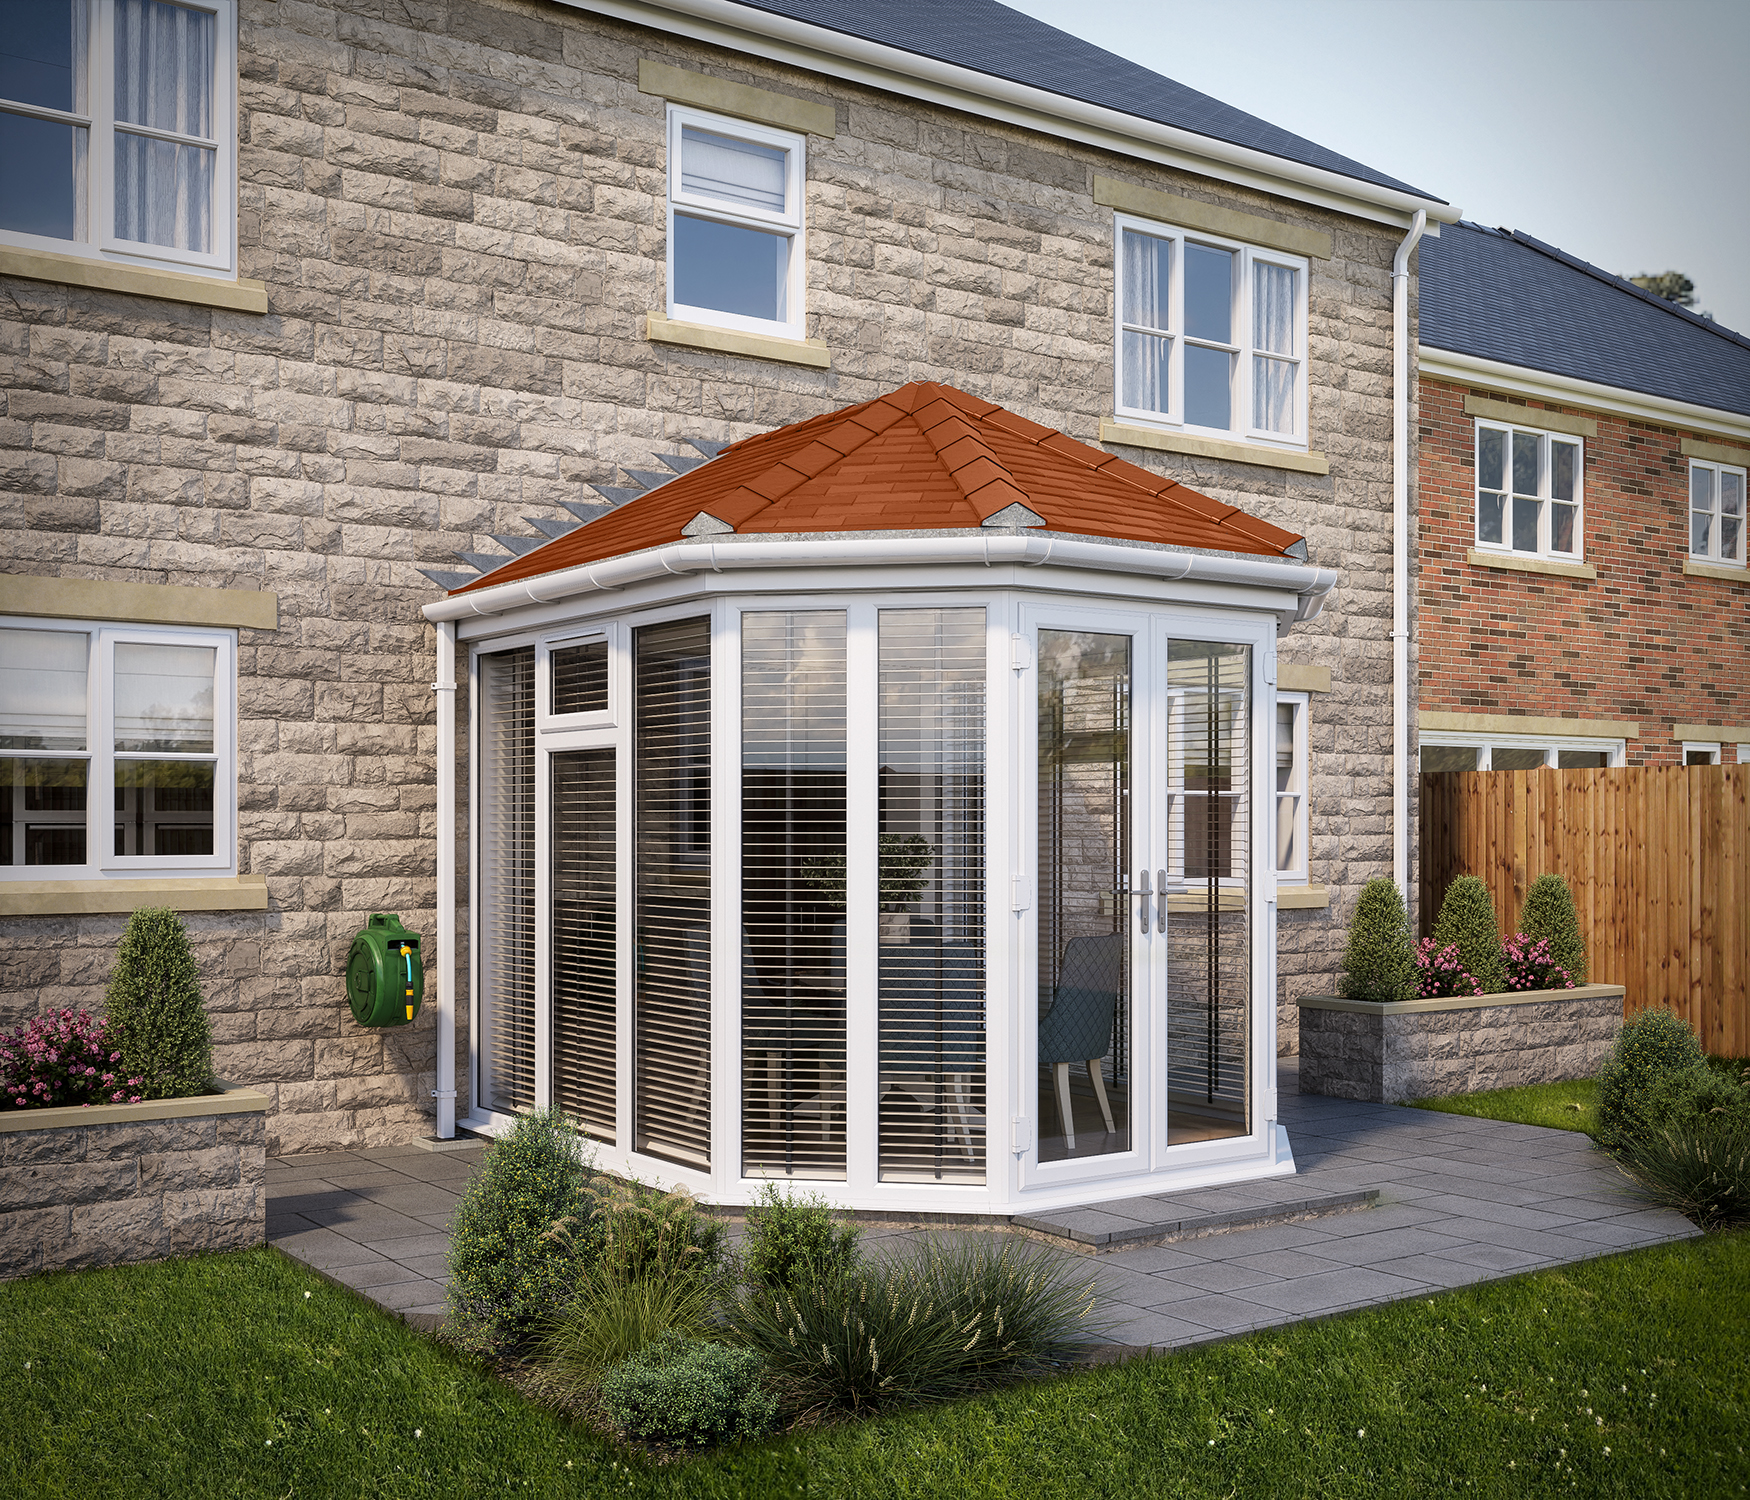 Image of SOLid Roof Full Height Victorian Conservatory White Frames with Rustic Terracotta Tiles - 13 x 10ft